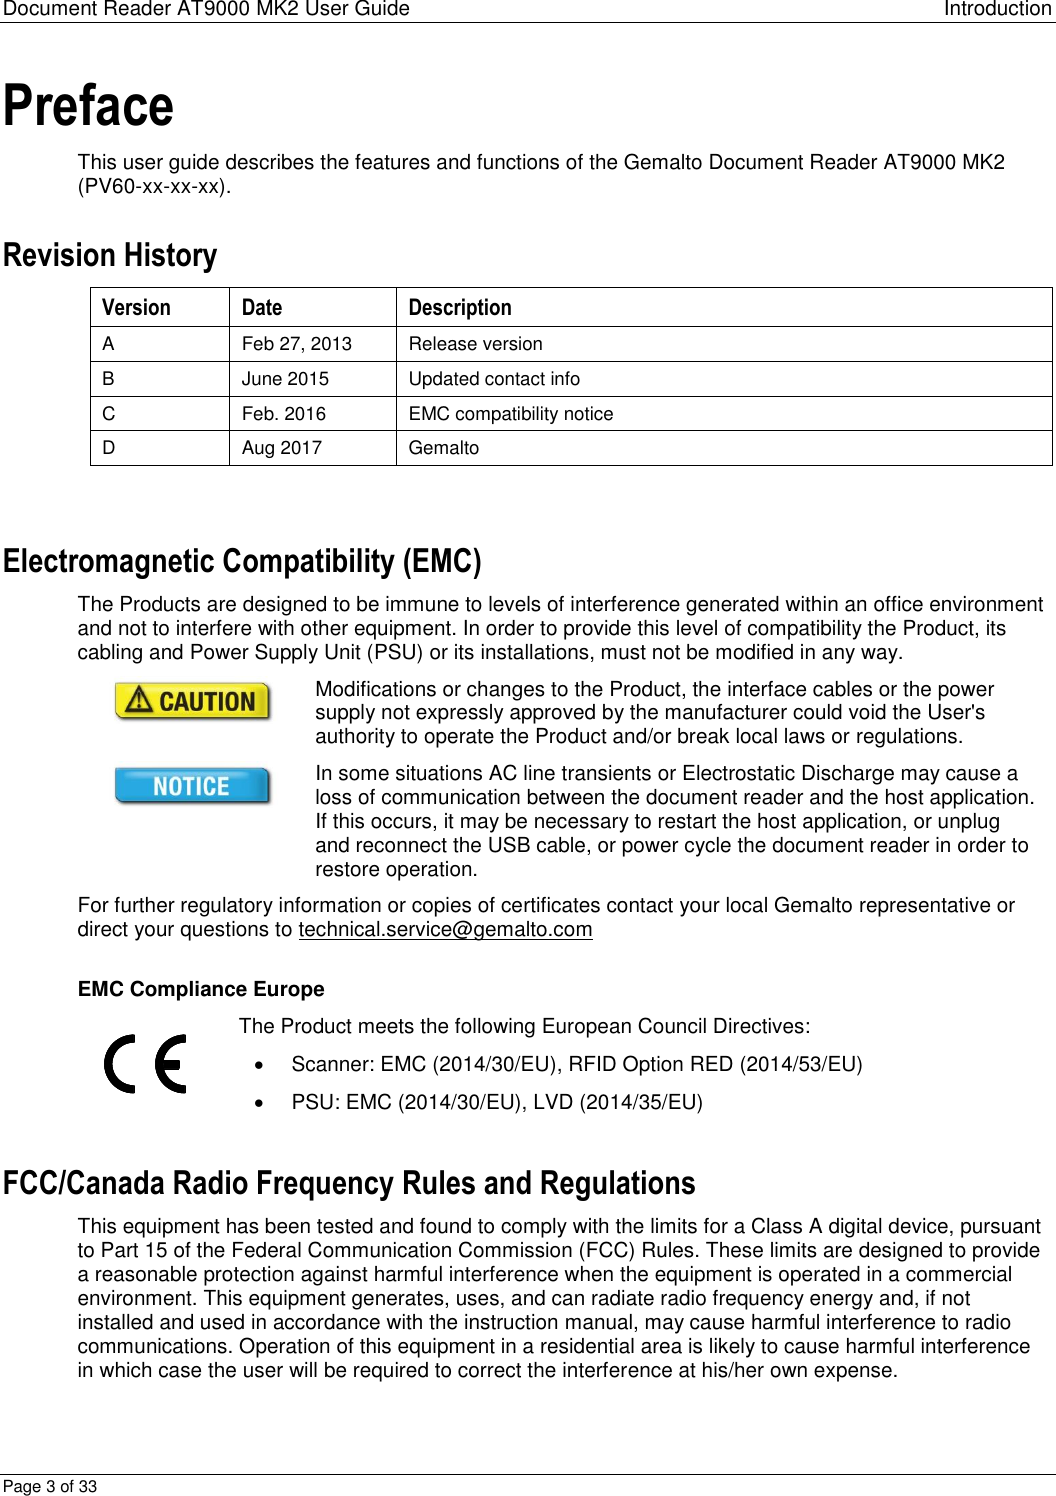 Document Reader AT9000 MK2 User Guide Introduction Page 3 of 33 Preface This user guide describes the features and functions of the Gemalto Document Reader AT9000 MK2 (PV60-xx-xx-xx). Revision History Version Date Description A Feb 27, 2013 Release version B June 2015 Updated contact info C Feb. 2016 EMC compatibility notice D Aug 2017 Gemalto  Electromagnetic Compatibility (EMC) The Products are designed to be immune to levels of interference generated within an office environment and not to interfere with other equipment. In order to provide this level of compatibility the Product, its cabling and Power Supply Unit (PSU) or its installations, must not be modified in any way.  Modifications or changes to the Product, the interface cables or the power supply not expressly approved by the manufacturer could void the User&apos;s authority to operate the Product and/or break local laws or regulations.  In some situations AC line transients or Electrostatic Discharge may cause a loss of communication between the document reader and the host application. If this occurs, it may be necessary to restart the host application, or unplug and reconnect the USB cable, or power cycle the document reader in order to restore operation. For further regulatory information or copies of certificates contact your local Gemalto representative or direct your questions to technical.service@gemalto.com  EMC Compliance Europe  The Product meets the following European Council Directives:    Scanner: EMC (2014/30/EU), RFID Option RED (2014/53/EU)   PSU: EMC (2014/30/EU), LVD (2014/35/EU) FCC/Canada Radio Frequency Rules and Regulations This equipment has been tested and found to comply with the limits for a Class A digital device, pursuant to Part 15 of the Federal Communication Commission (FCC) Rules. These limits are designed to provide a reasonable protection against harmful interference when the equipment is operated in a commercial environment. This equipment generates, uses, and can radiate radio frequency energy and, if not installed and used in accordance with the instruction manual, may cause harmful interference to radio communications. Operation of this equipment in a residential area is likely to cause harmful interference in which case the user will be required to correct the interference at his/her own expense. 